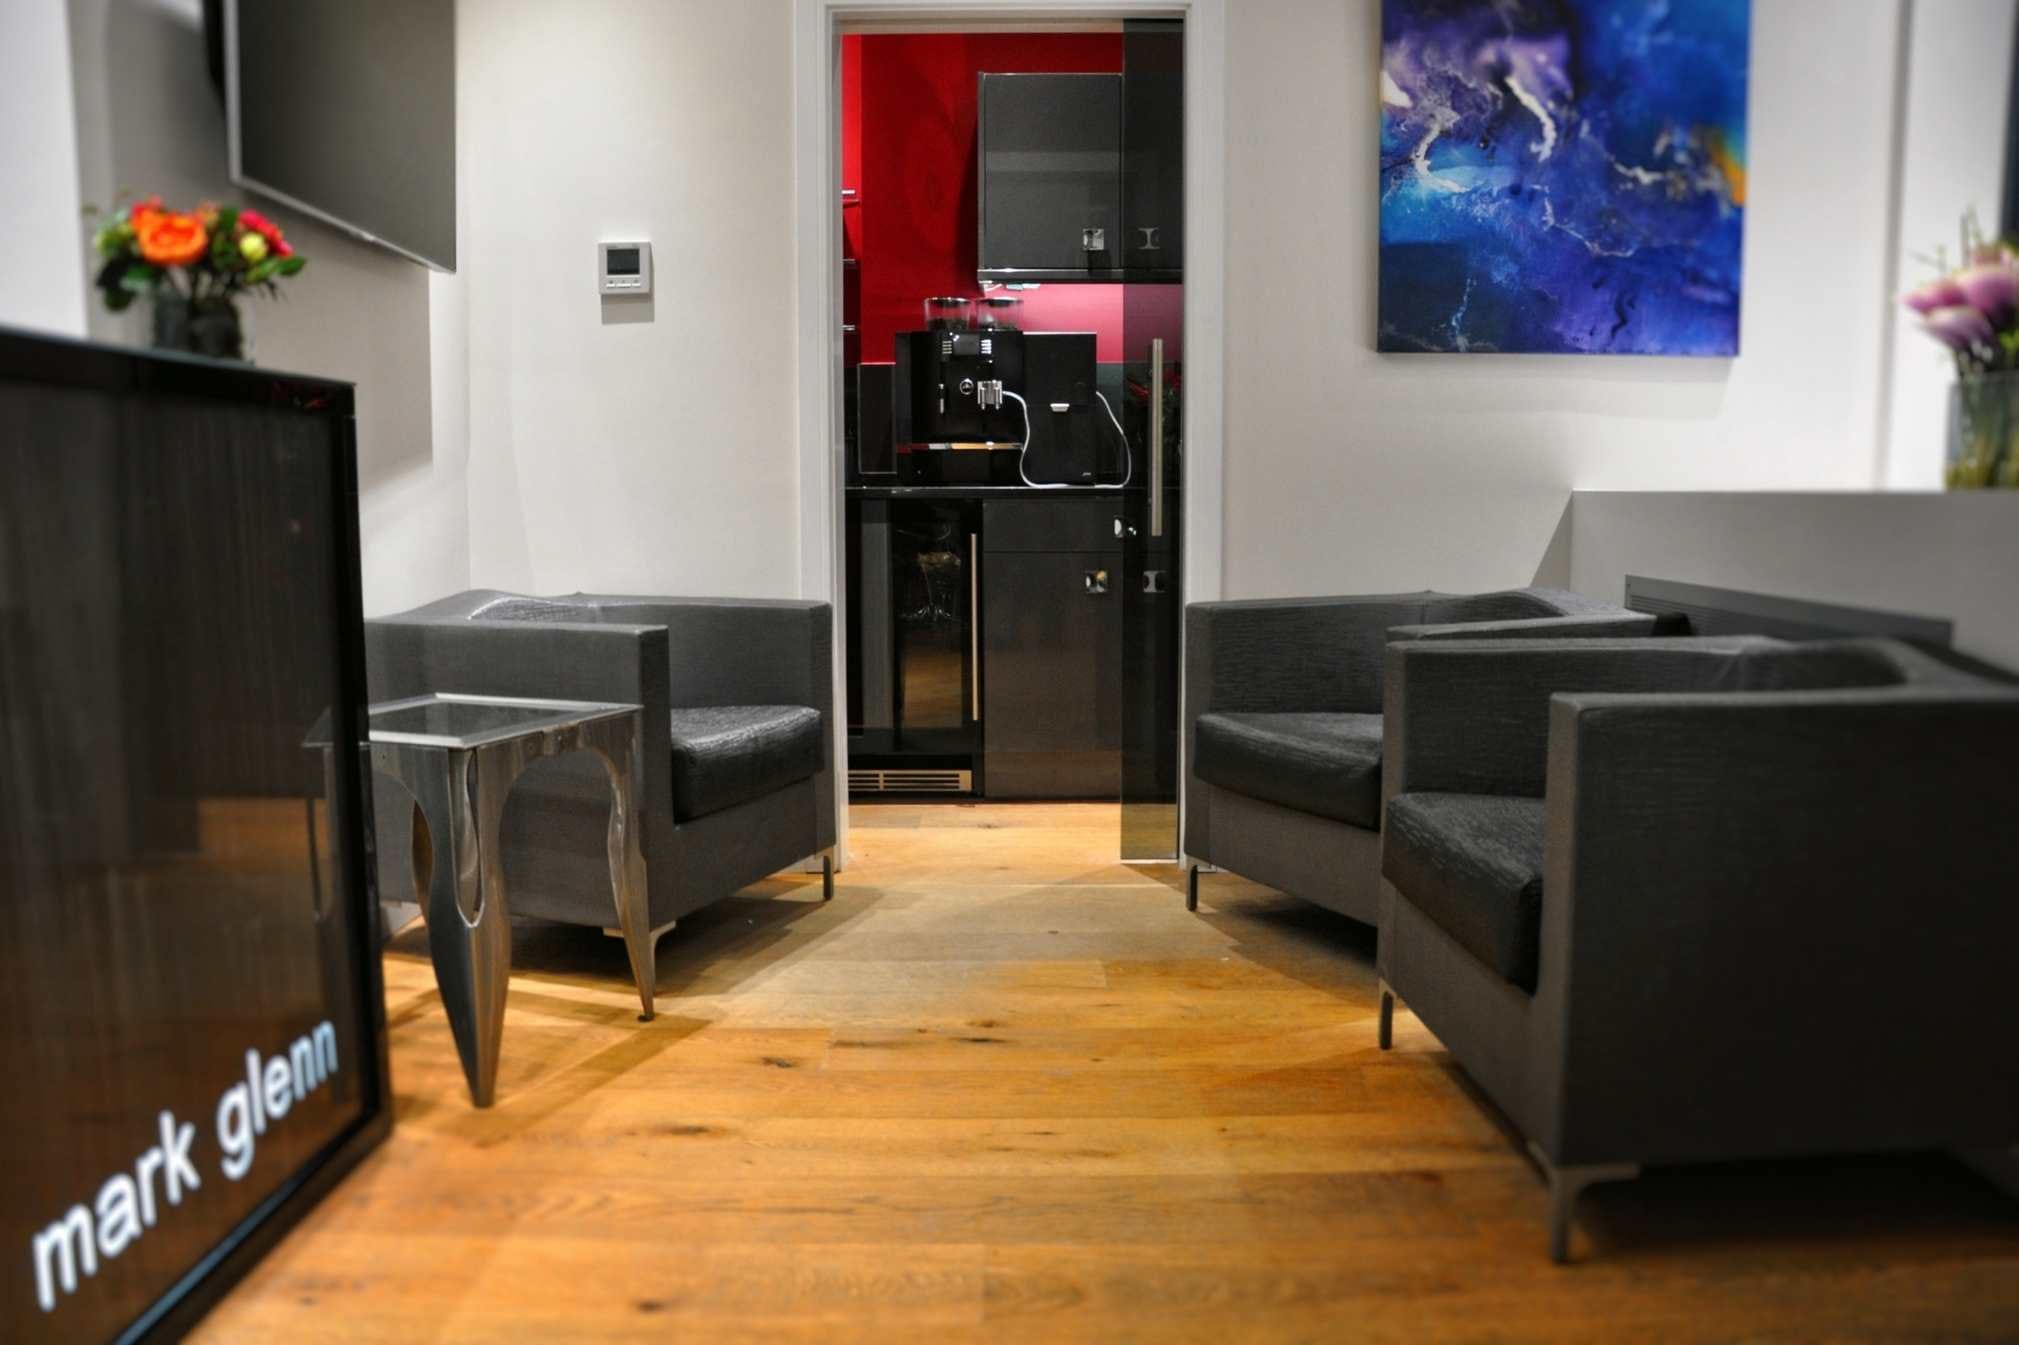 Free refreshments from our restaurant-quality coffee bar including a choice of teas and over 20 different coffees at Mark Glenn's London Hair Extensions Studio